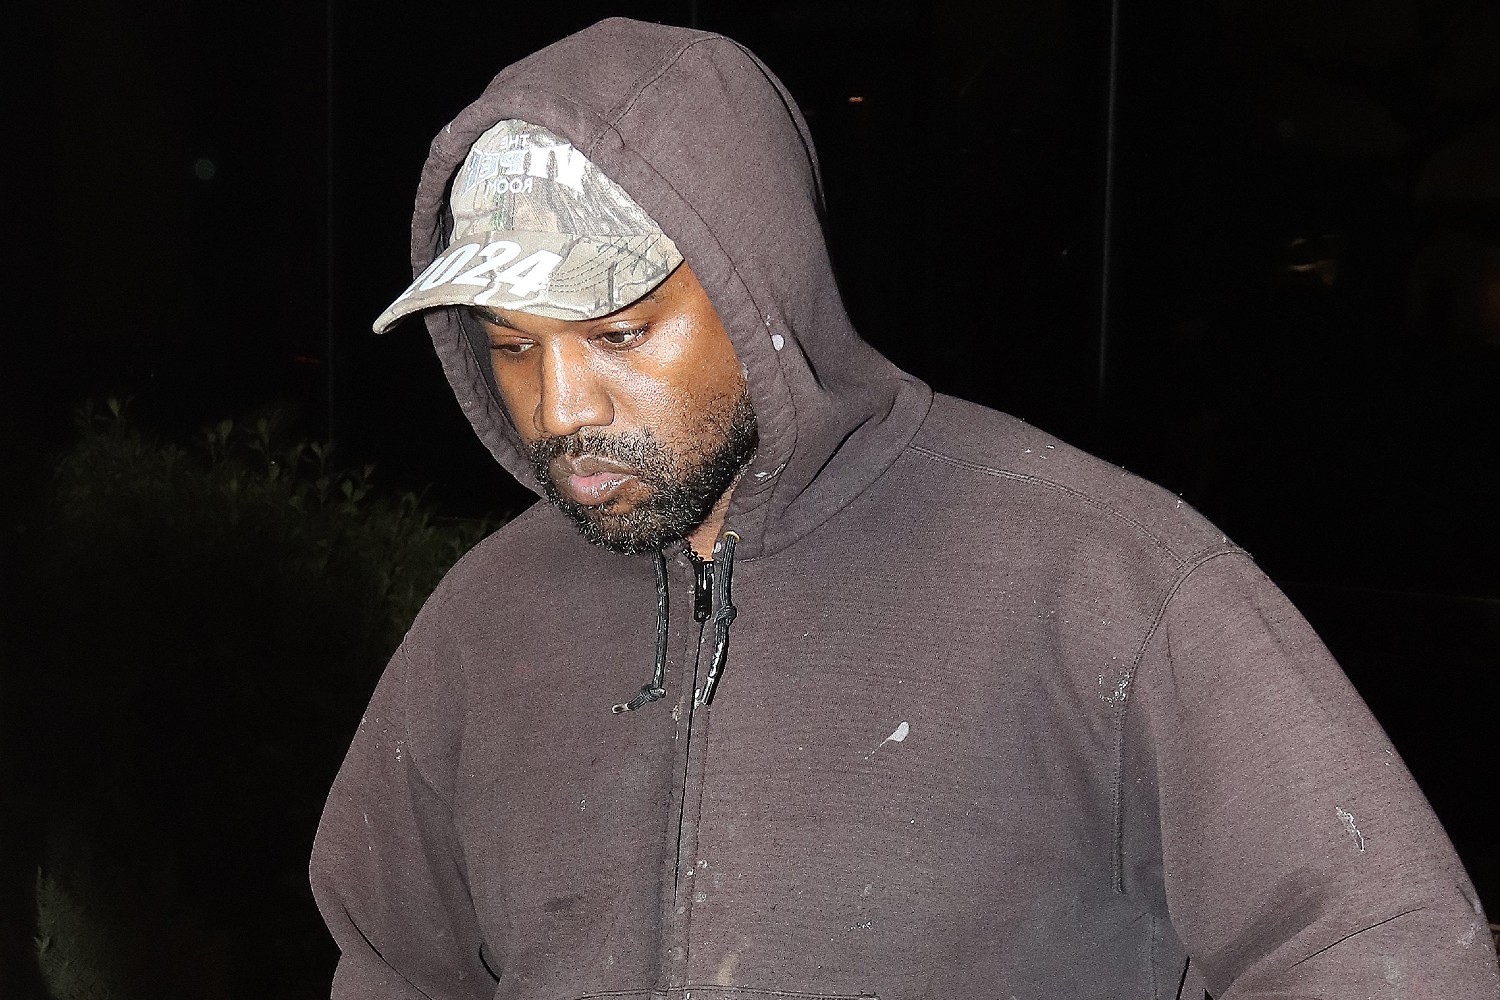 Kanye West 'drew a swastika in meeting' and 'told manager to kiss